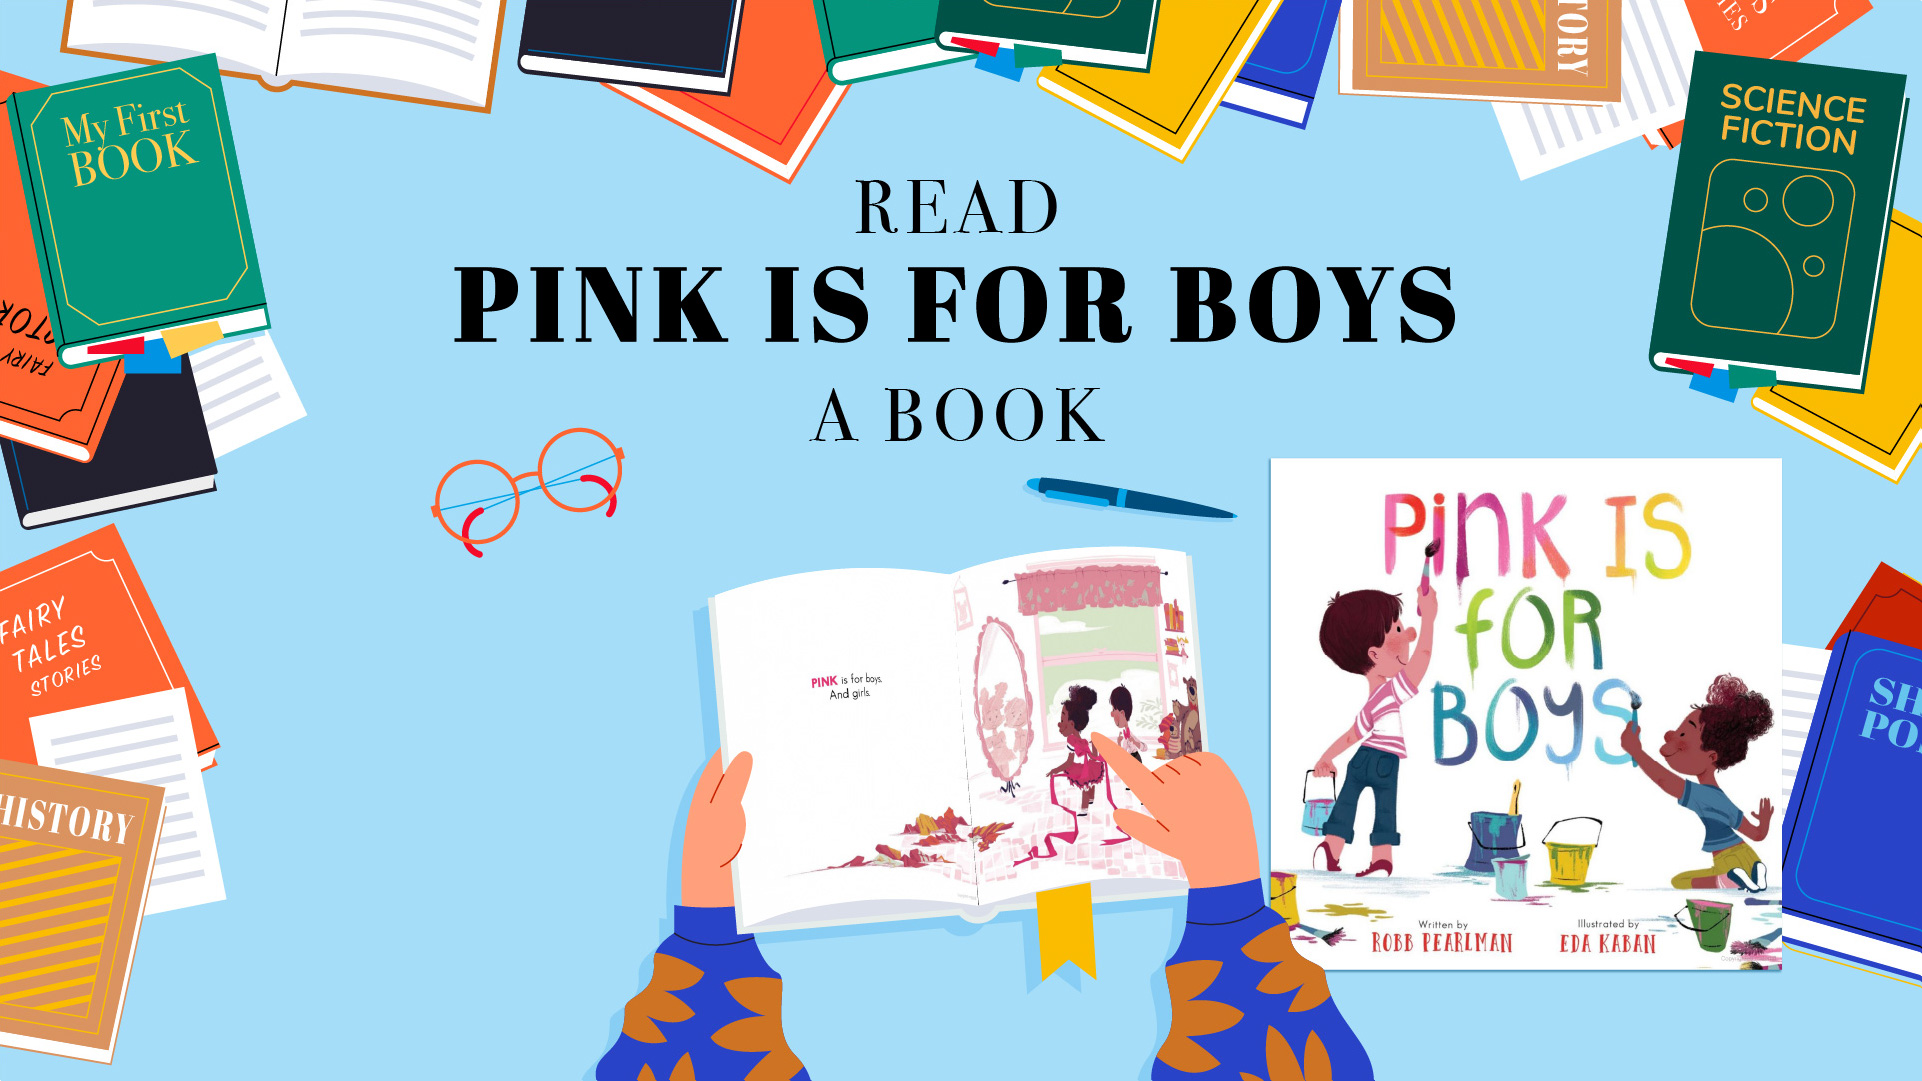 Books border, headline- first line: READ second line: "Pink is for Boys" third line: A BOOK graphics of orange glasses, blue pen, a person opening a book and point at the two spread pages from "Pink is for Boys". The cover of "Pink is for Boys" on right side.